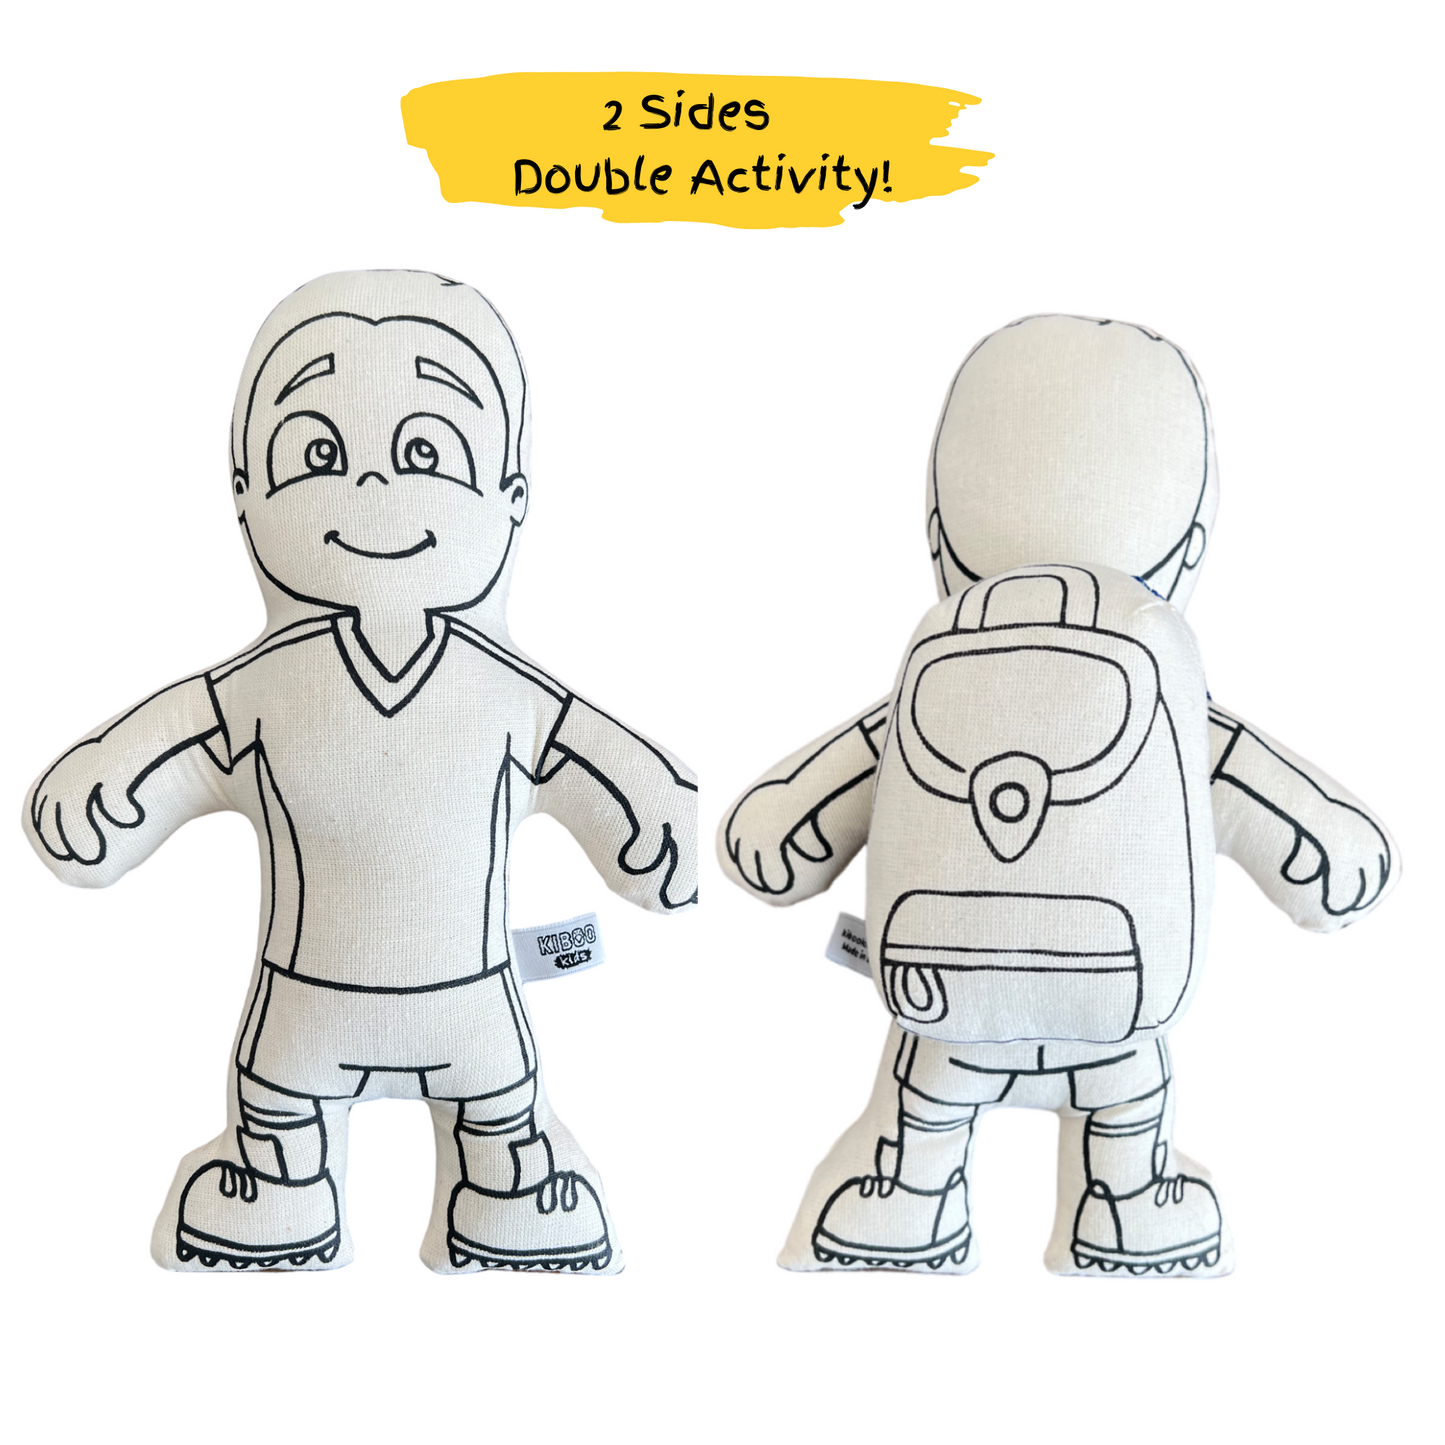 Kiboo Kids Soccer Series: Soccer Boy Doll - Colorable and Washable for Creative Play